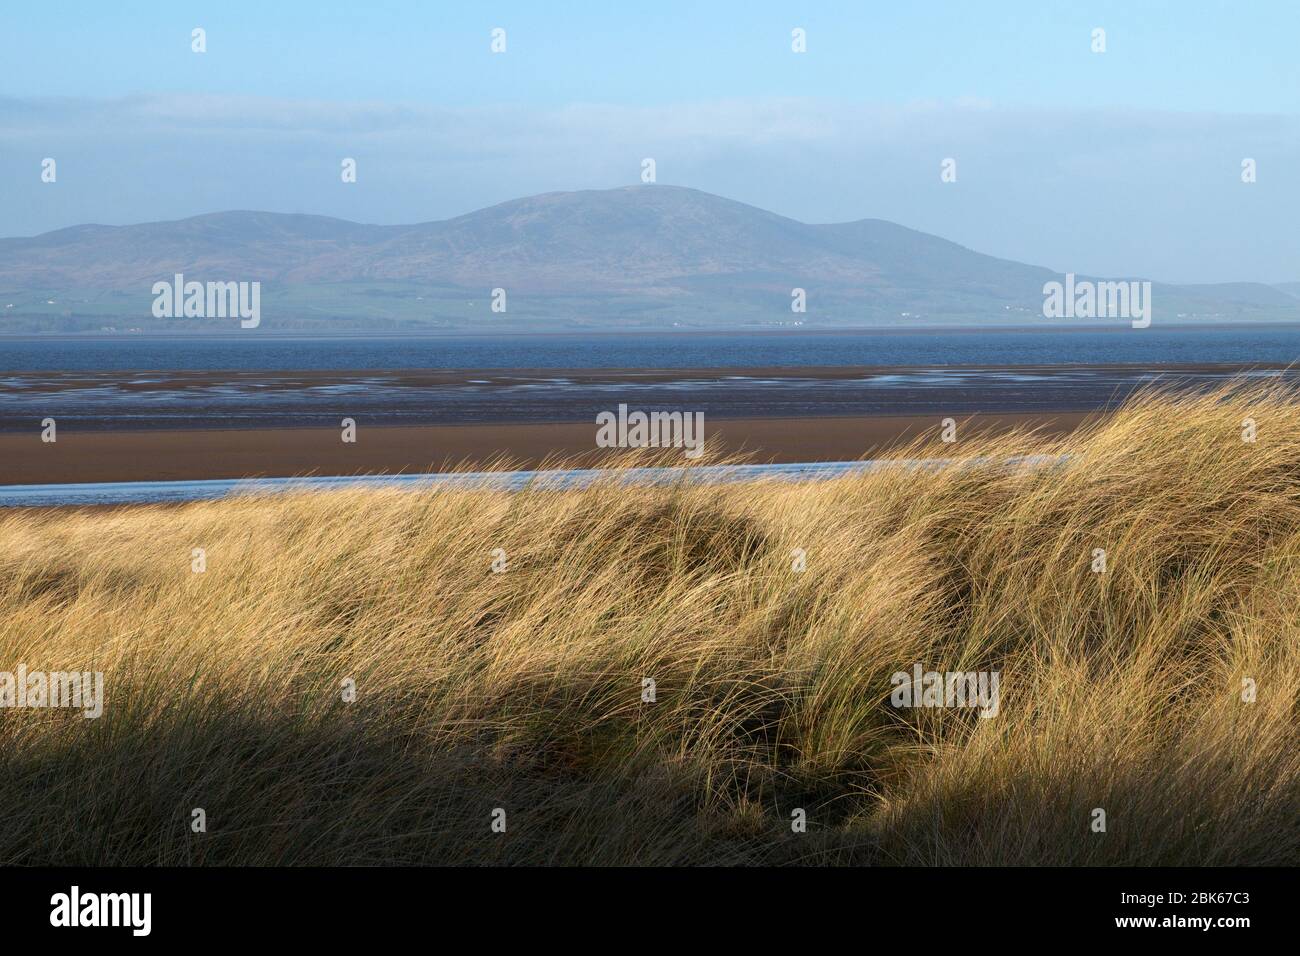 From dunes near Silloth, Cumbria, looking across the Solway Firth to Criffel in Dumfries & Galloway Stock Photo